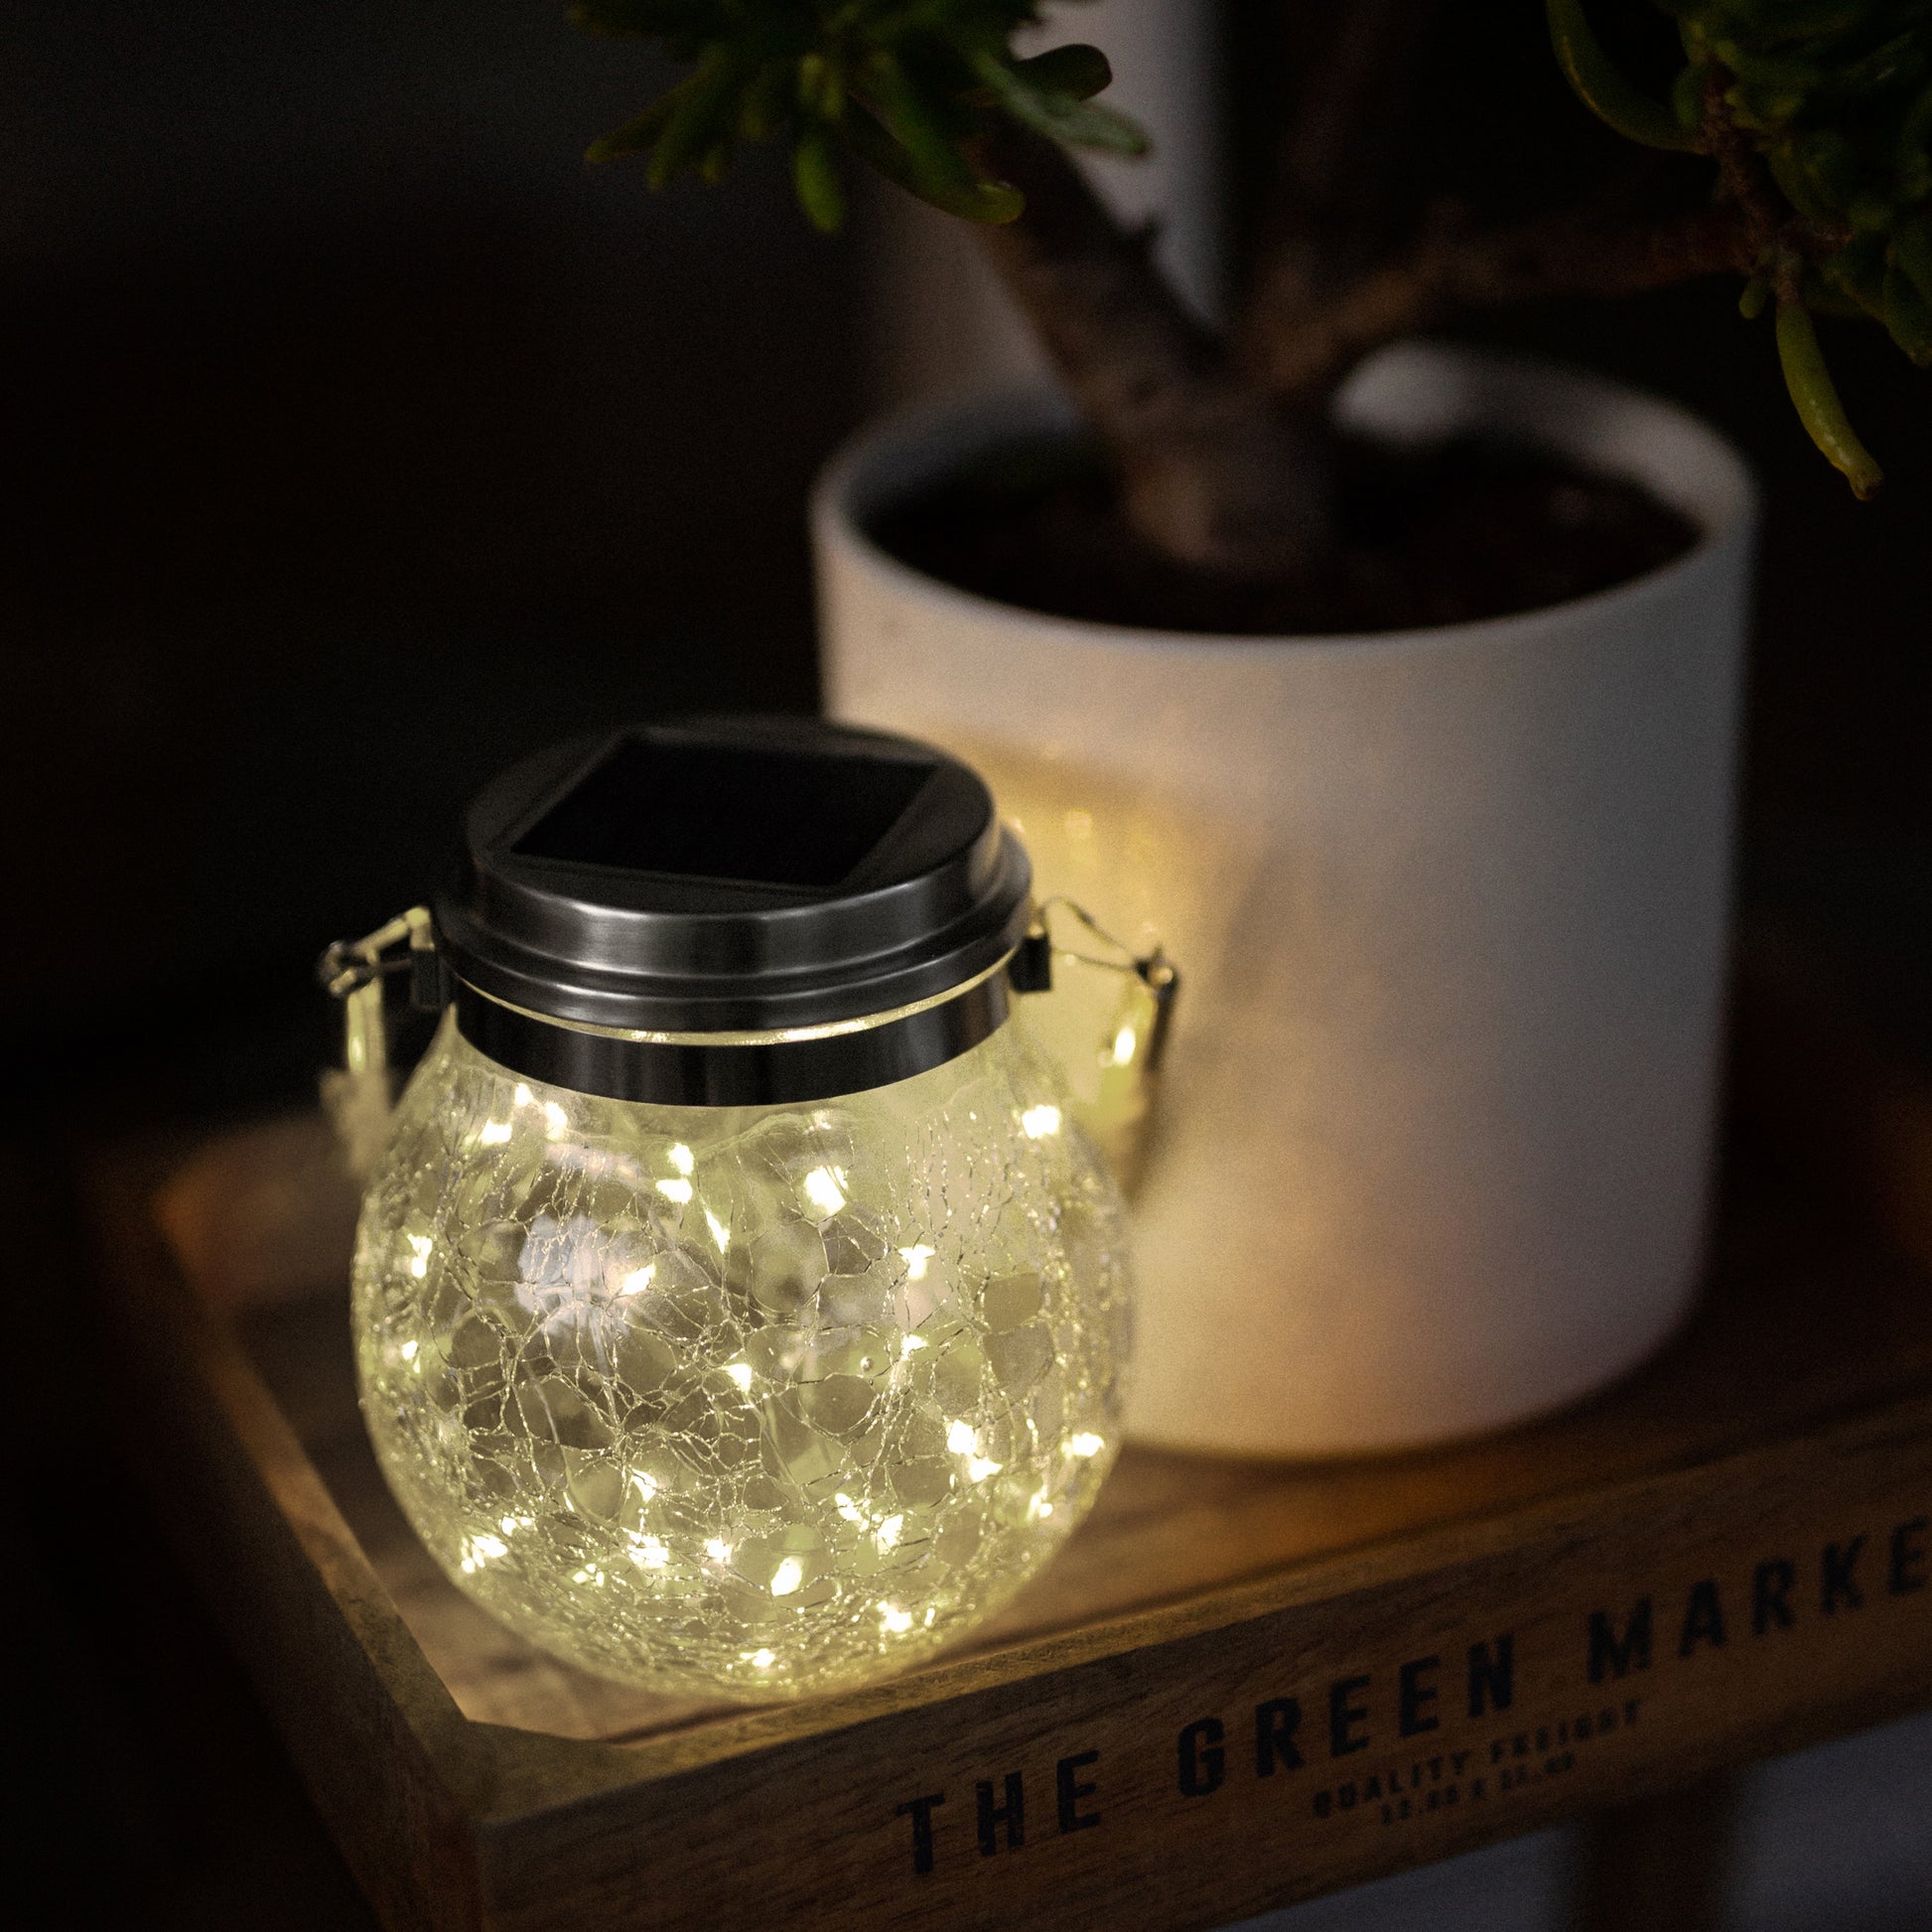 Solar crackle jar light turned on and sitting on a wooden tray next to a plant